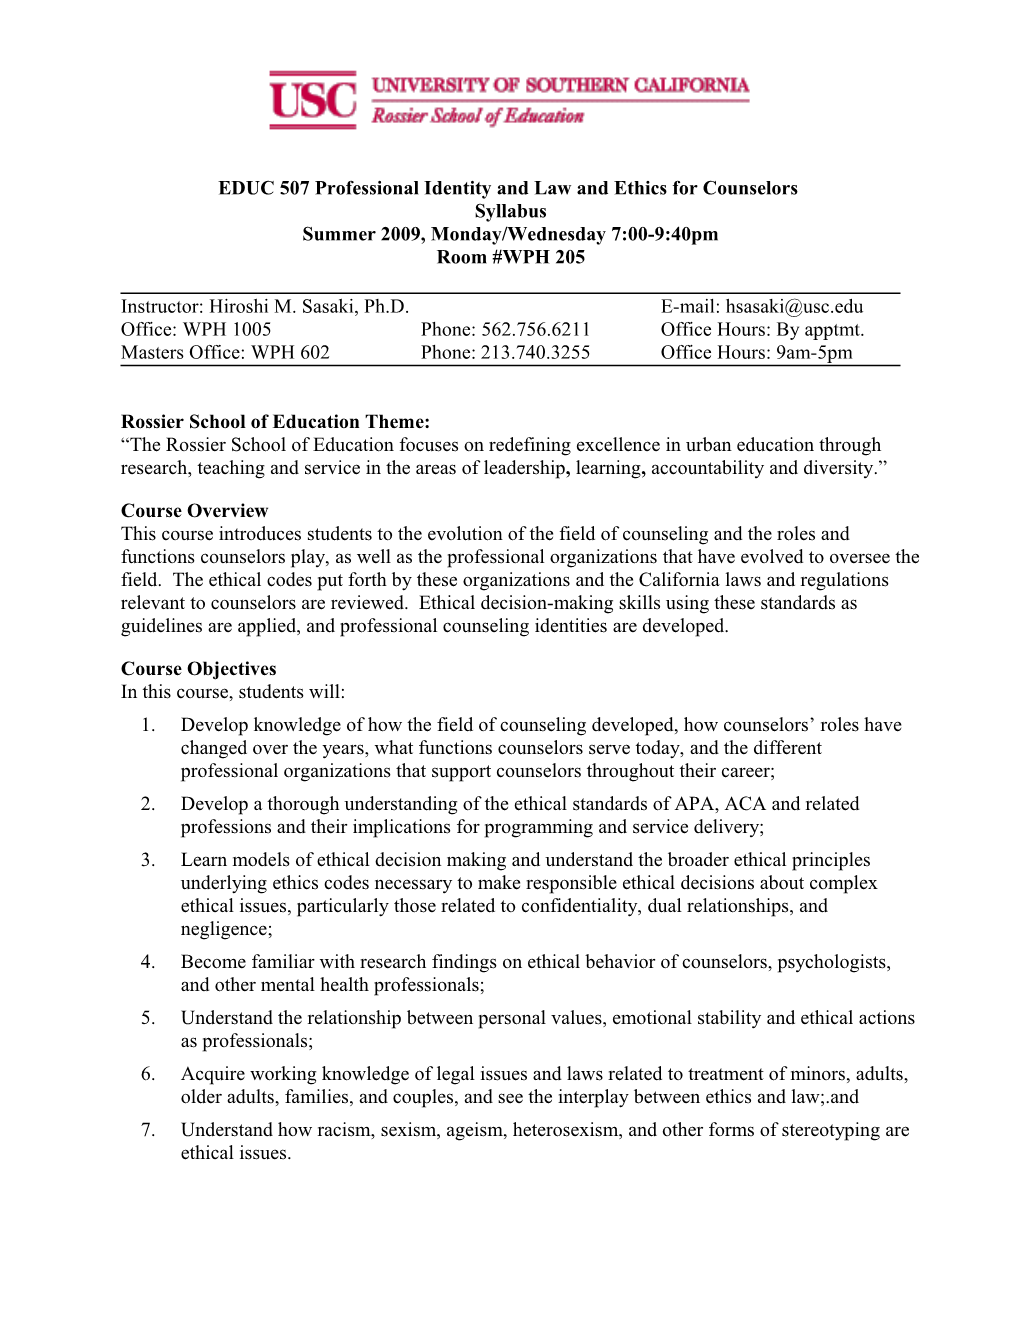 EDUC 507 Professional Identity and Law and Ethics for Counselors